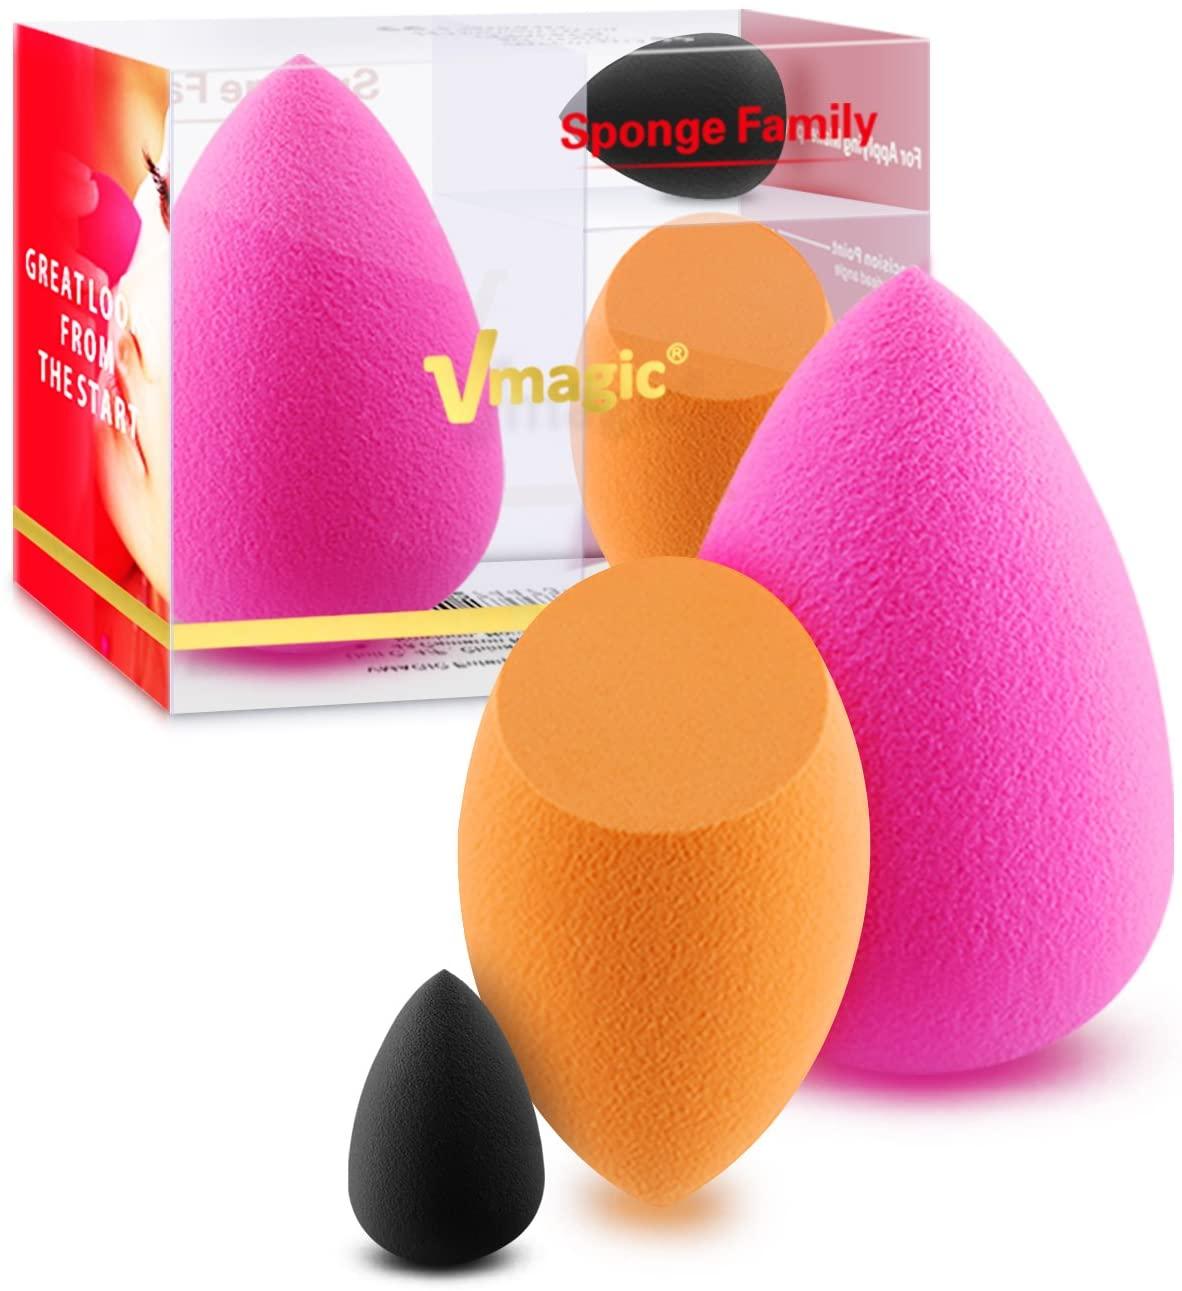 Here is the biggest error you make with your beauty blender